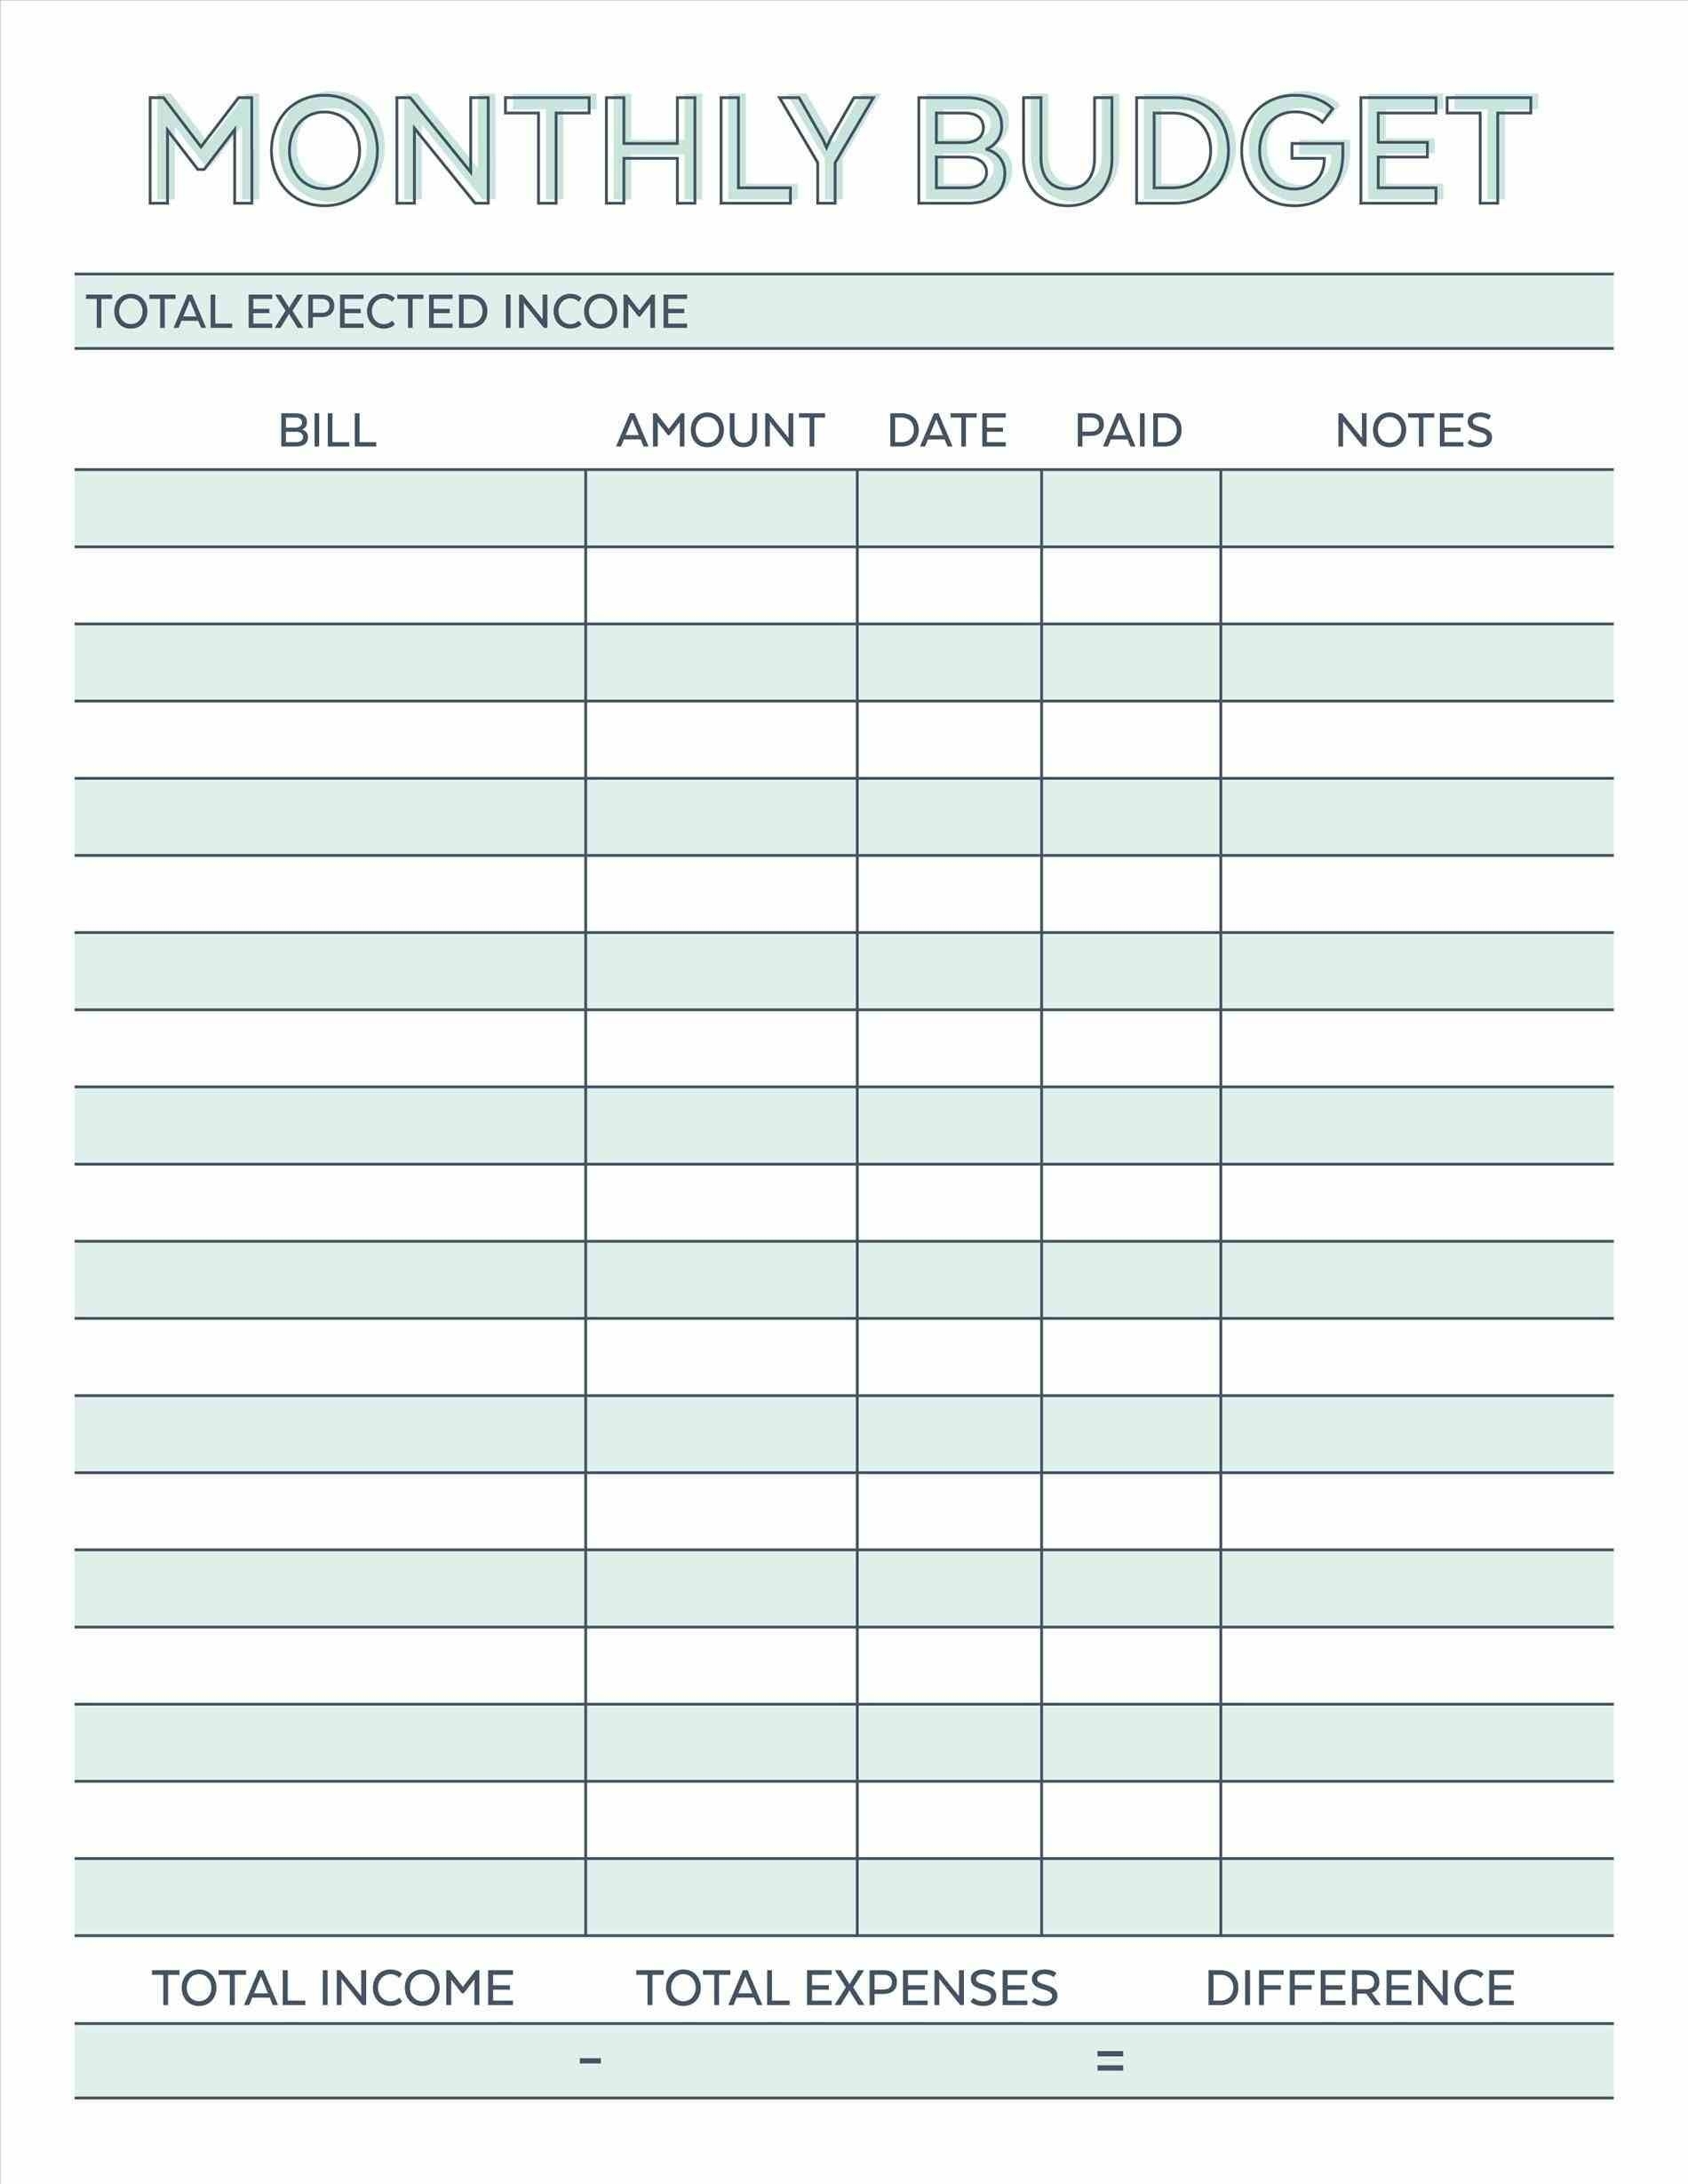 Budget Planner Planner Worksheet Monthly Bills Template Free with Simple Printable Monthly Bill Organizer Spreadsheet